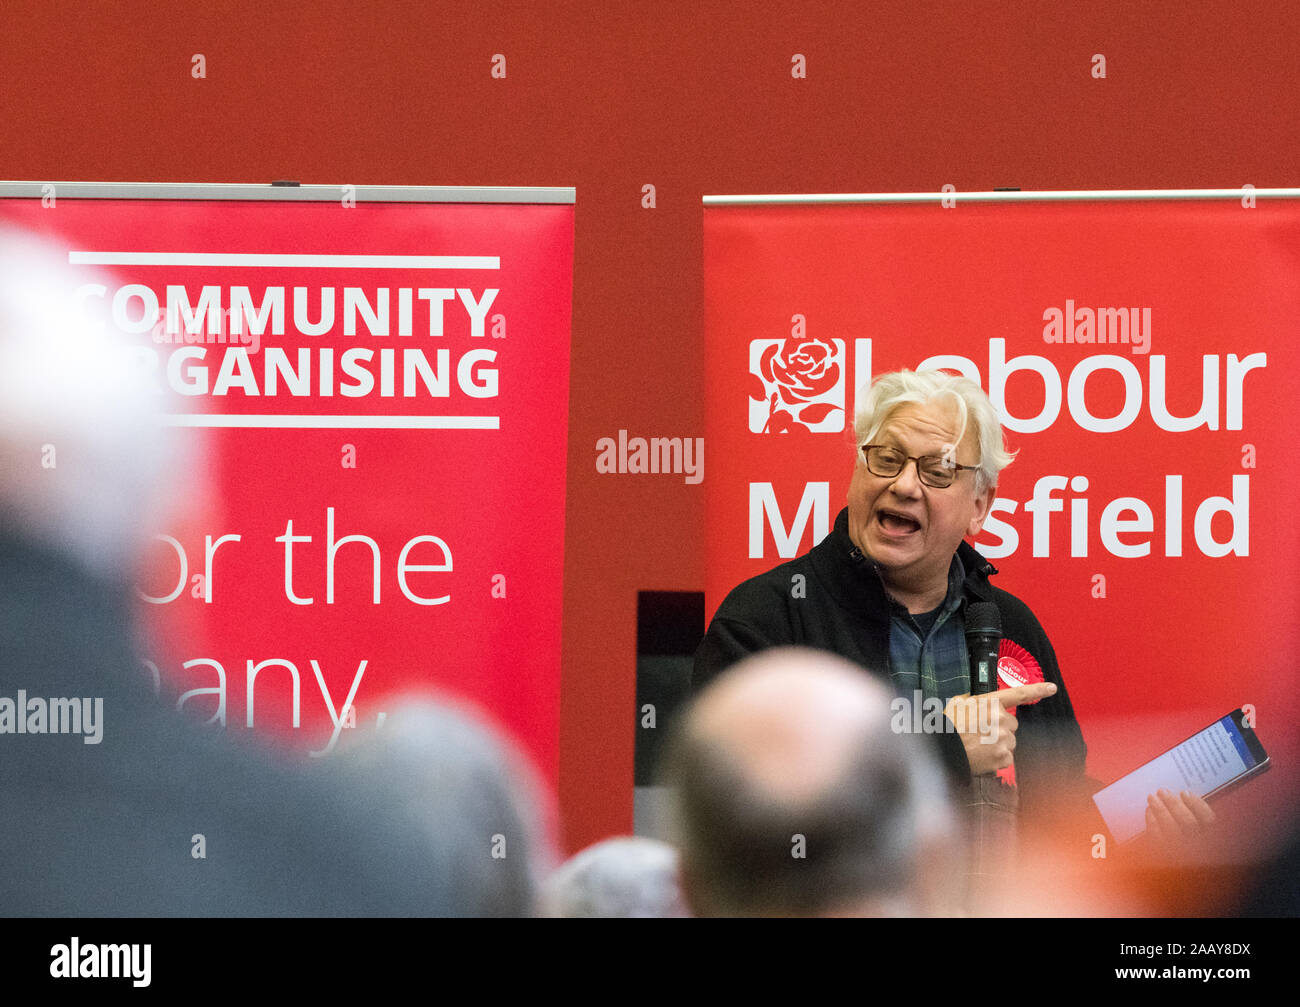 Mansfield, Nottinghamshire,  UK. 24th. November, 2019. Jonathan Lansman, N.E.C. member speaking at the “Unseat Ben Bradley” event in Mansfield, Nottinghamshire. Ben Bradley the Conservative Party candidate for Mansfield won this Labour seat from Sir Alan Meale in the 2017 General Election with a small majority of 1,057. This seat is one of the key battle grounds between the two main parties in the 12th. December General Election, especially now that the Brexit Party are not contesting this seat. Credit: Alan Beastall/Alamy Live News Stock Photo